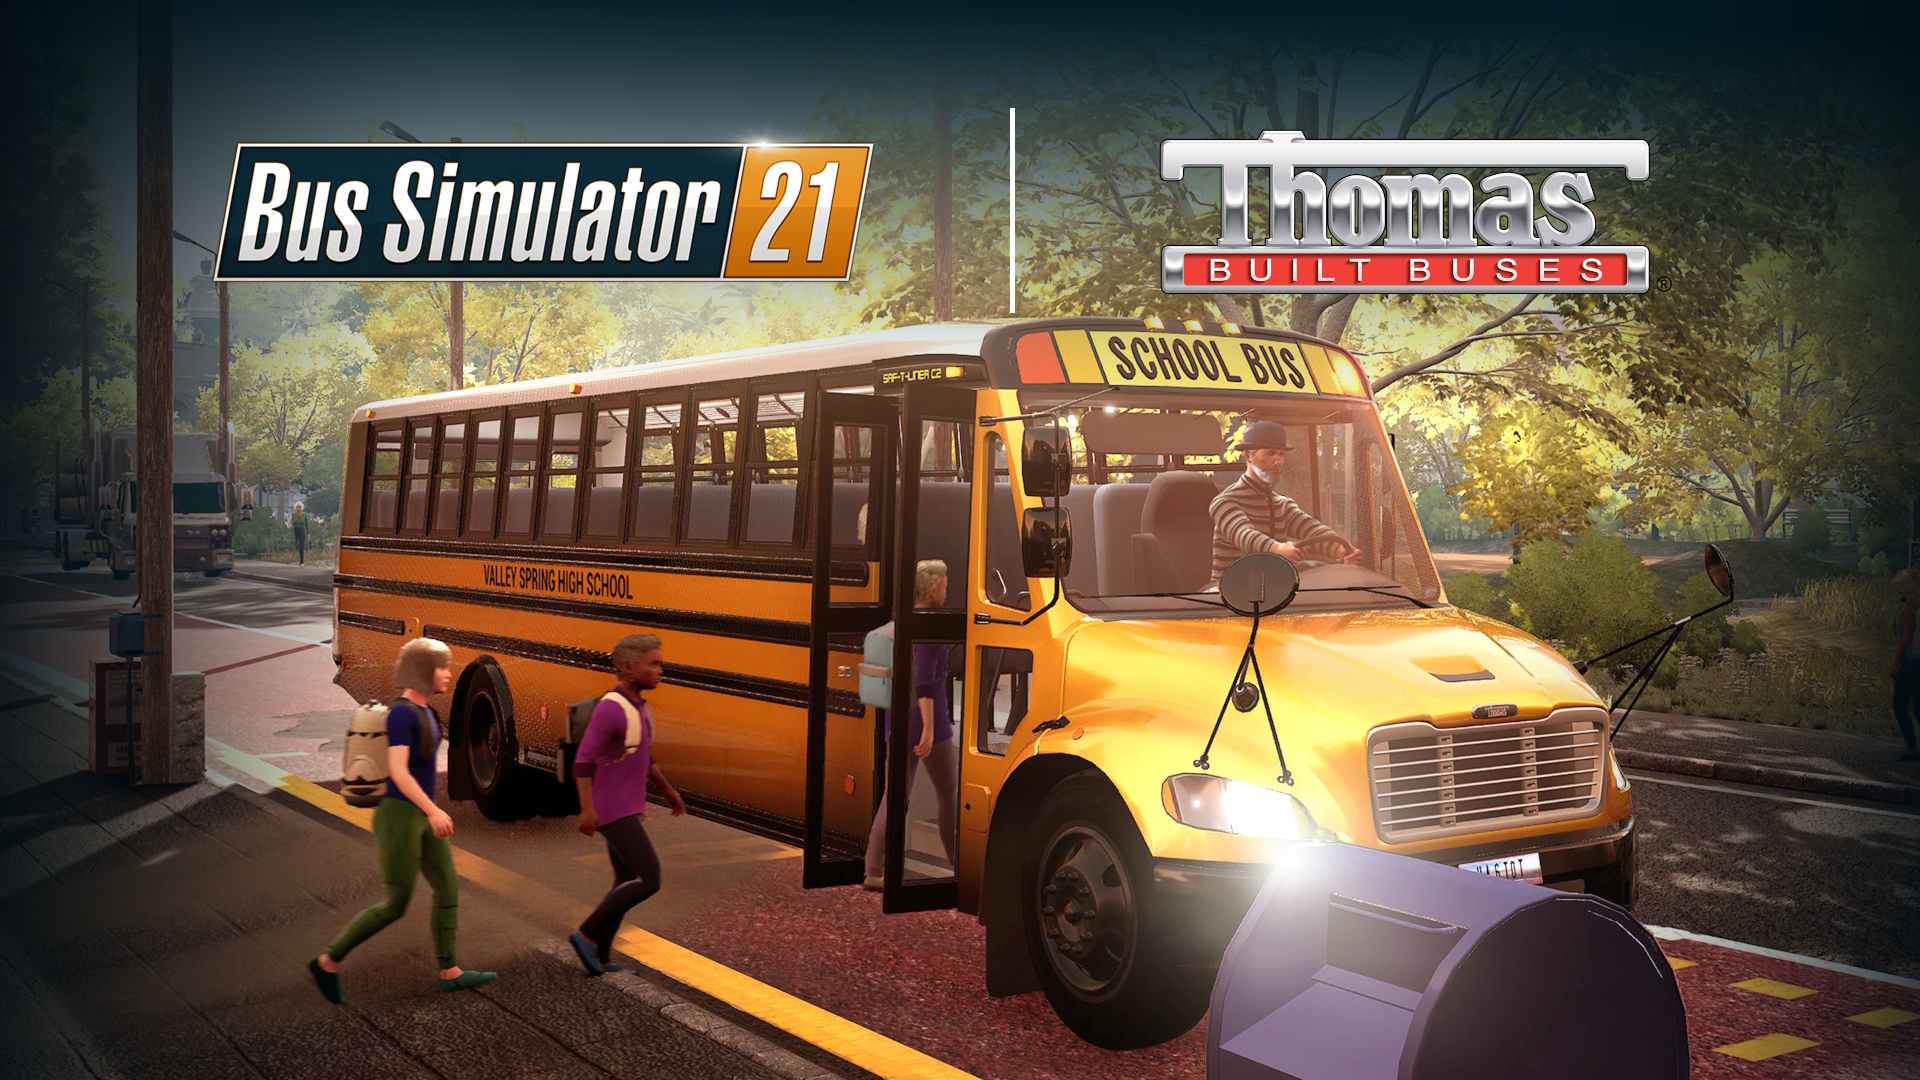 Bus Simulator 21 Next Stop - Thomas Built Buses® Bus Pack introduces an  additional school bus for the game!